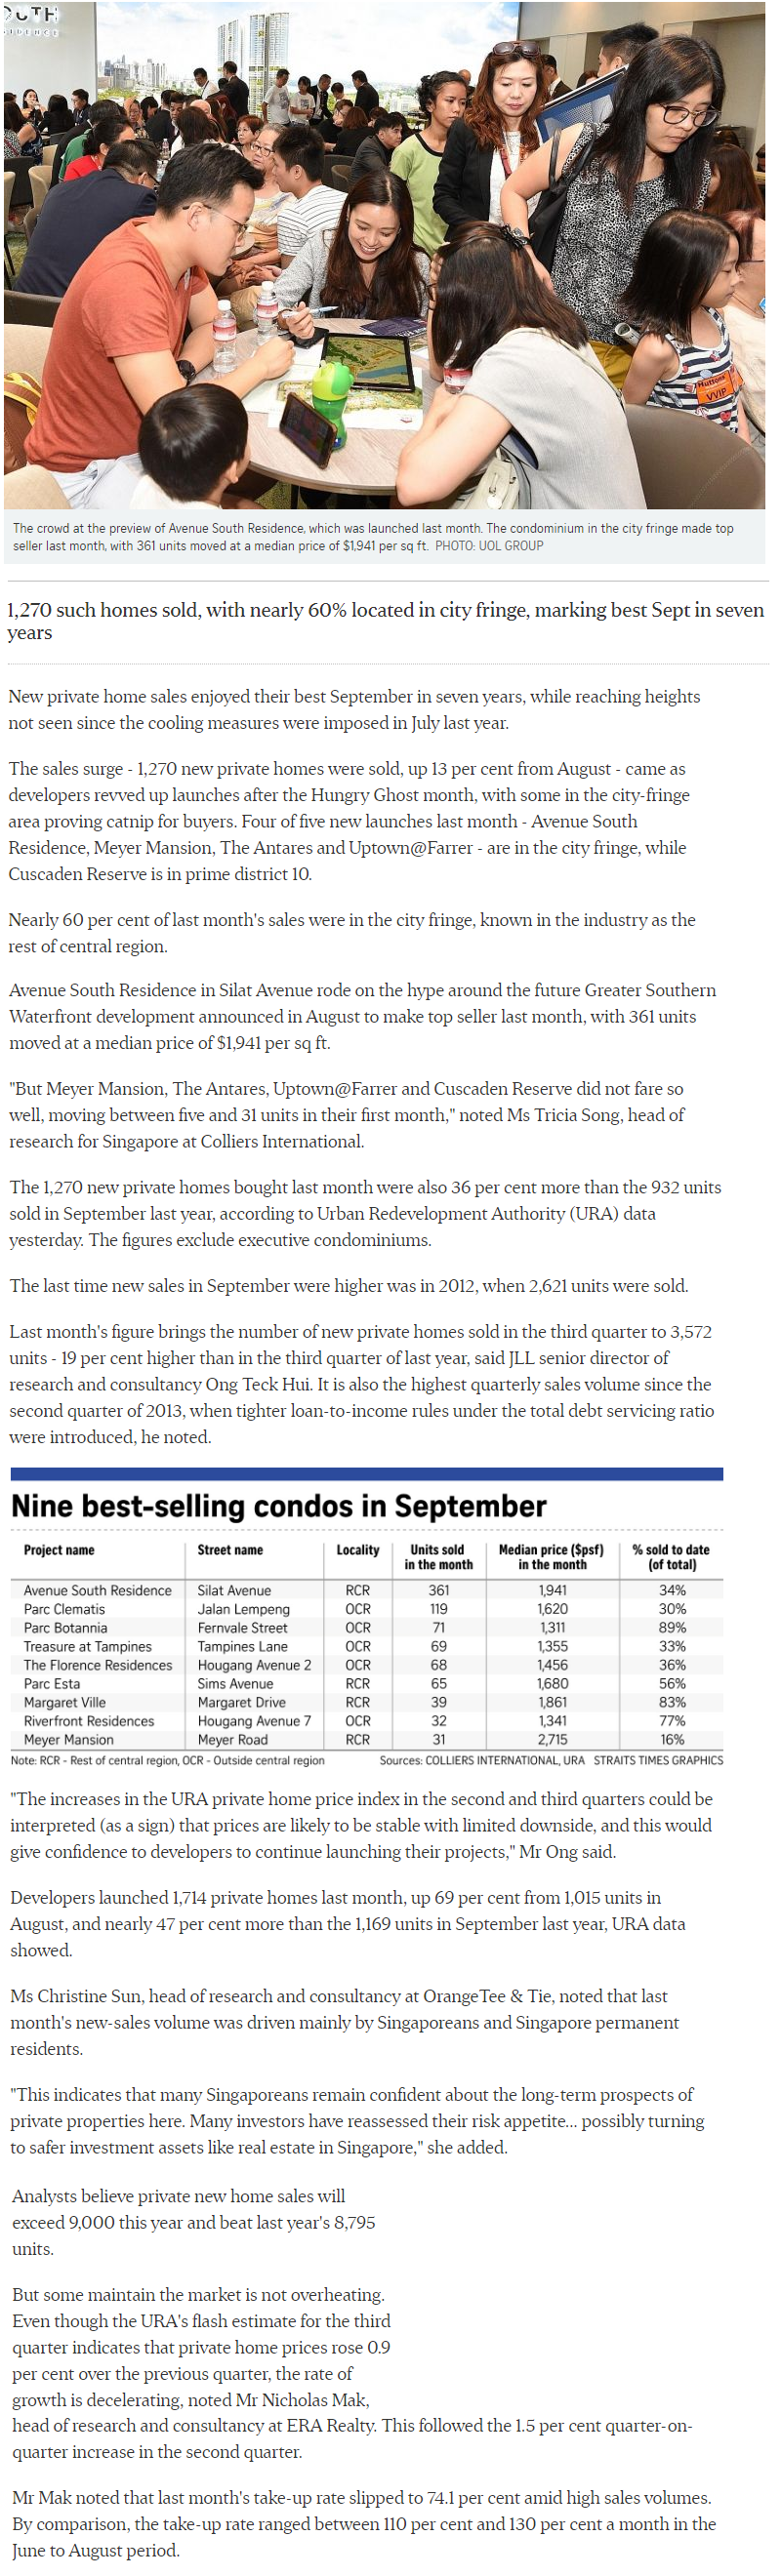 North Gaia - New private Home Sales Hit A Hight In September